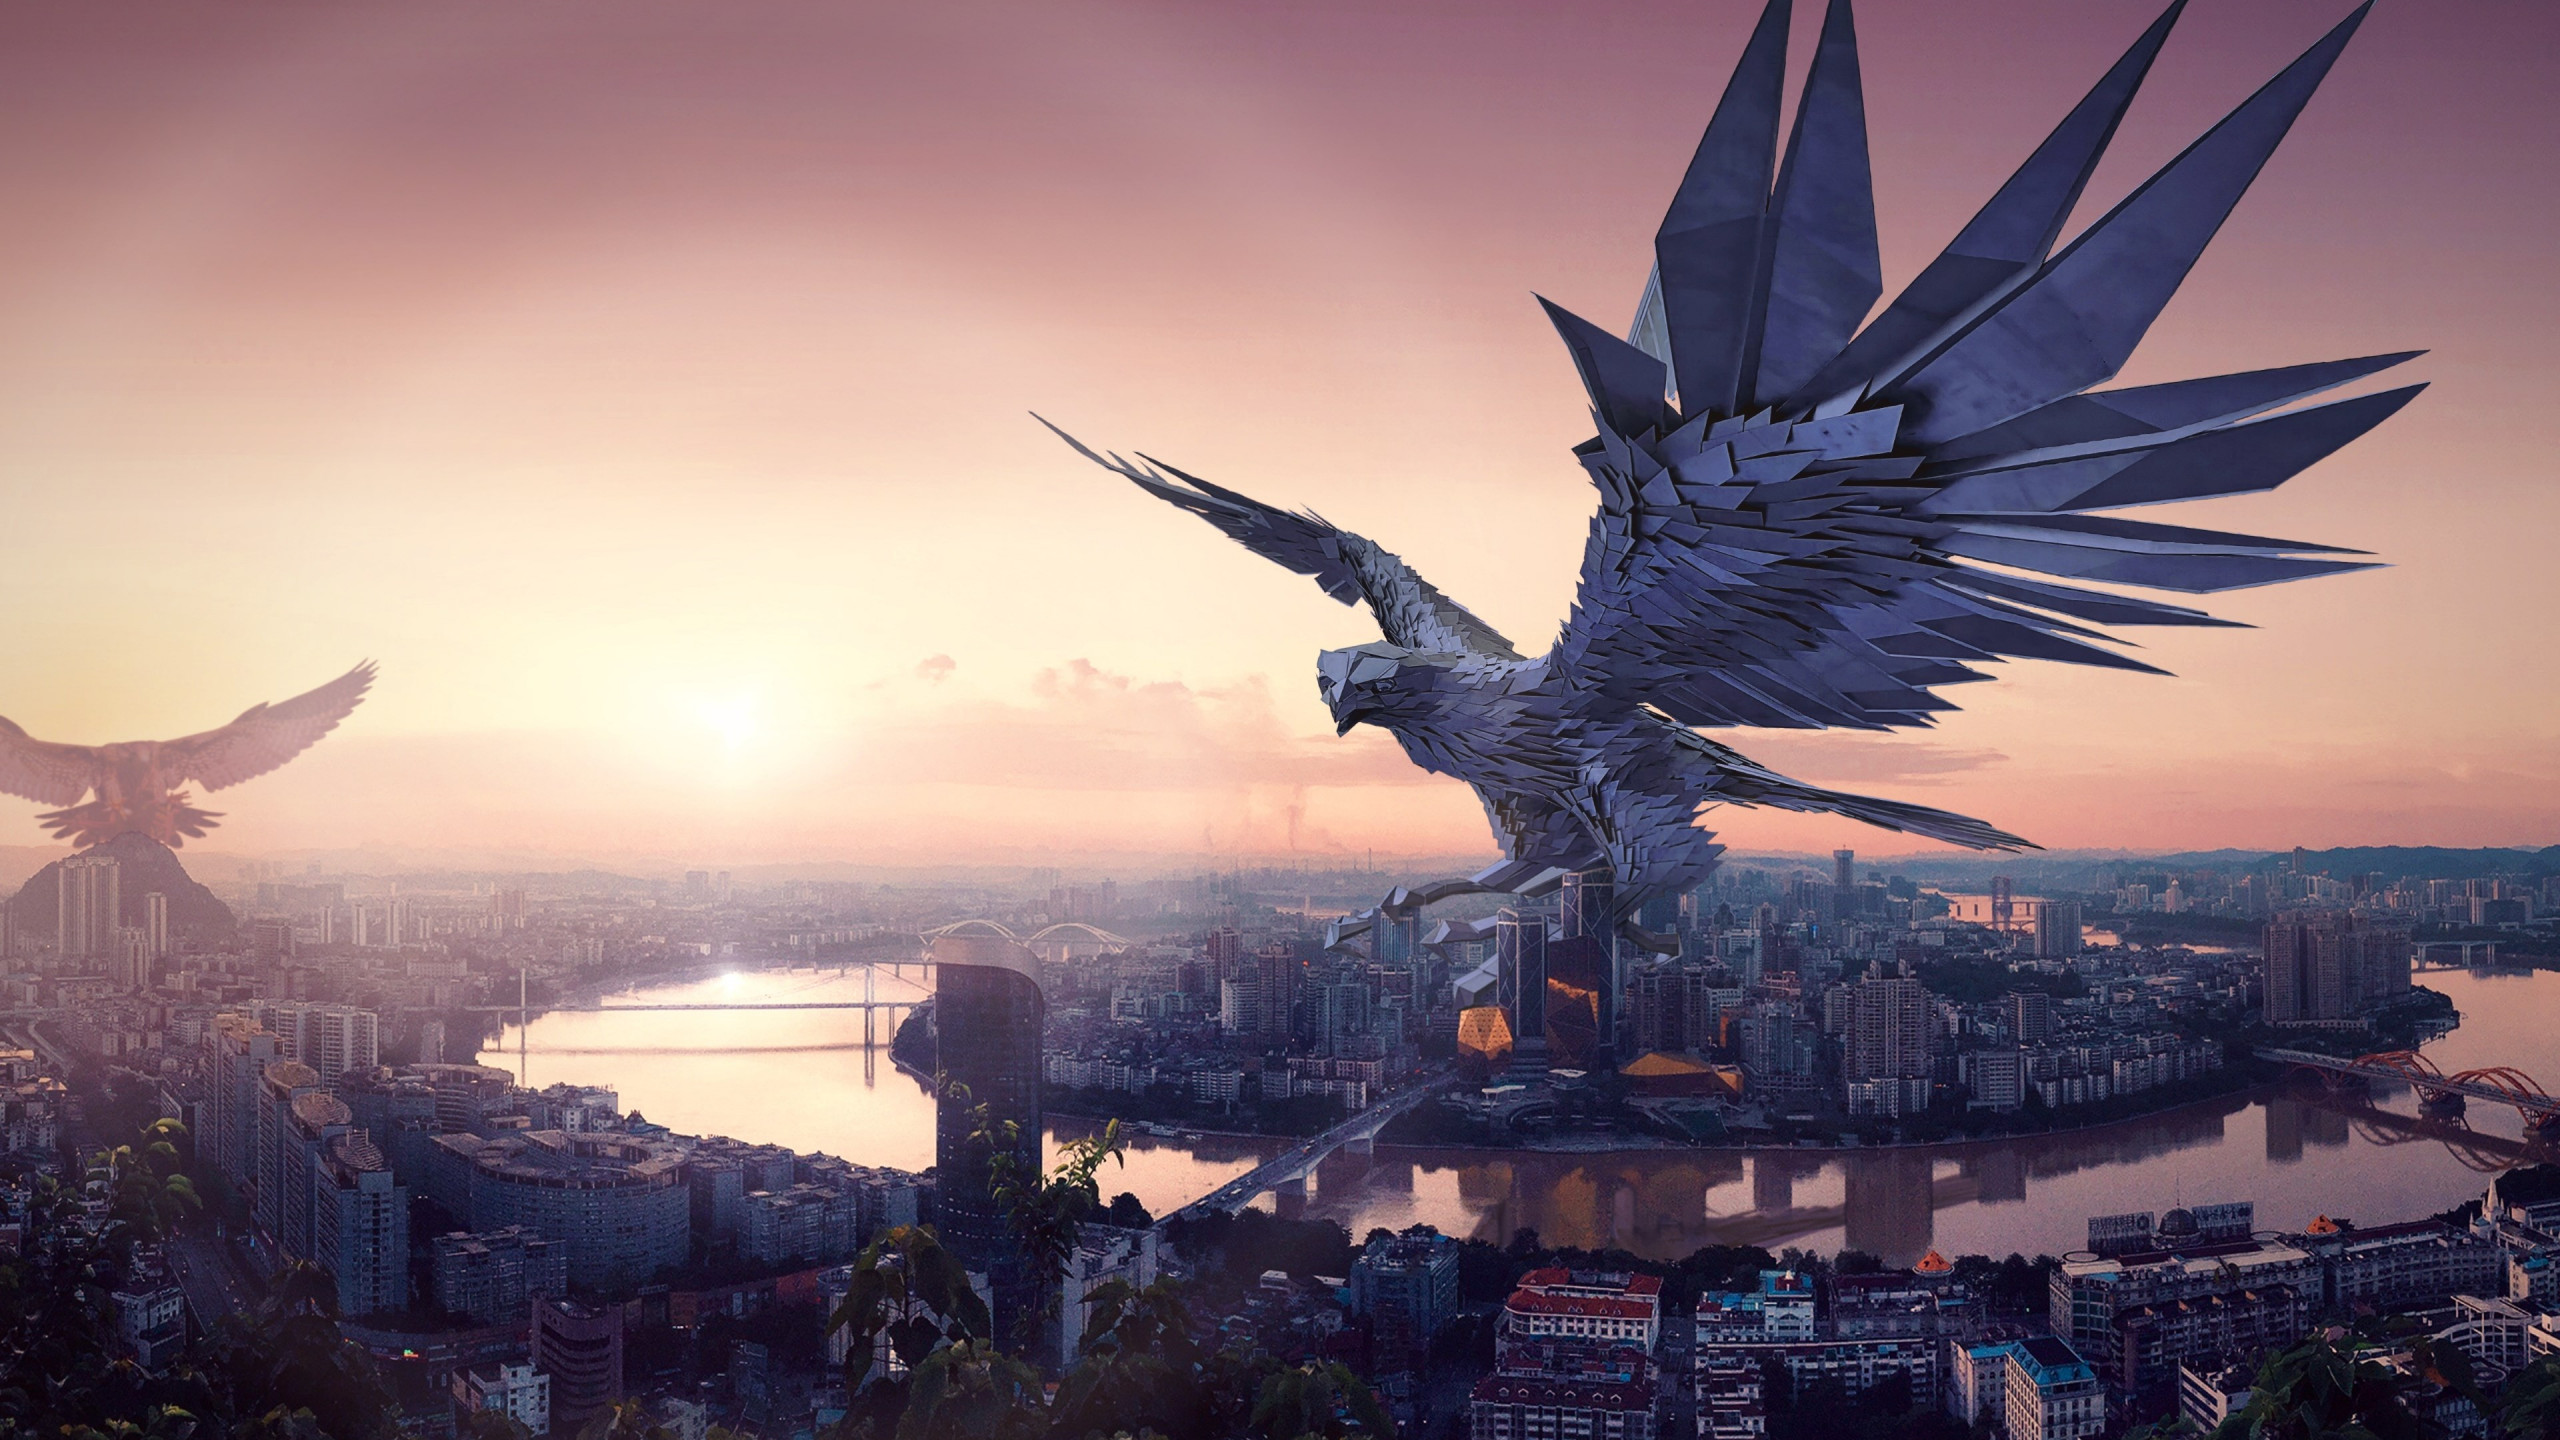 The falcon, protector of the city wallpaper 2560x1440